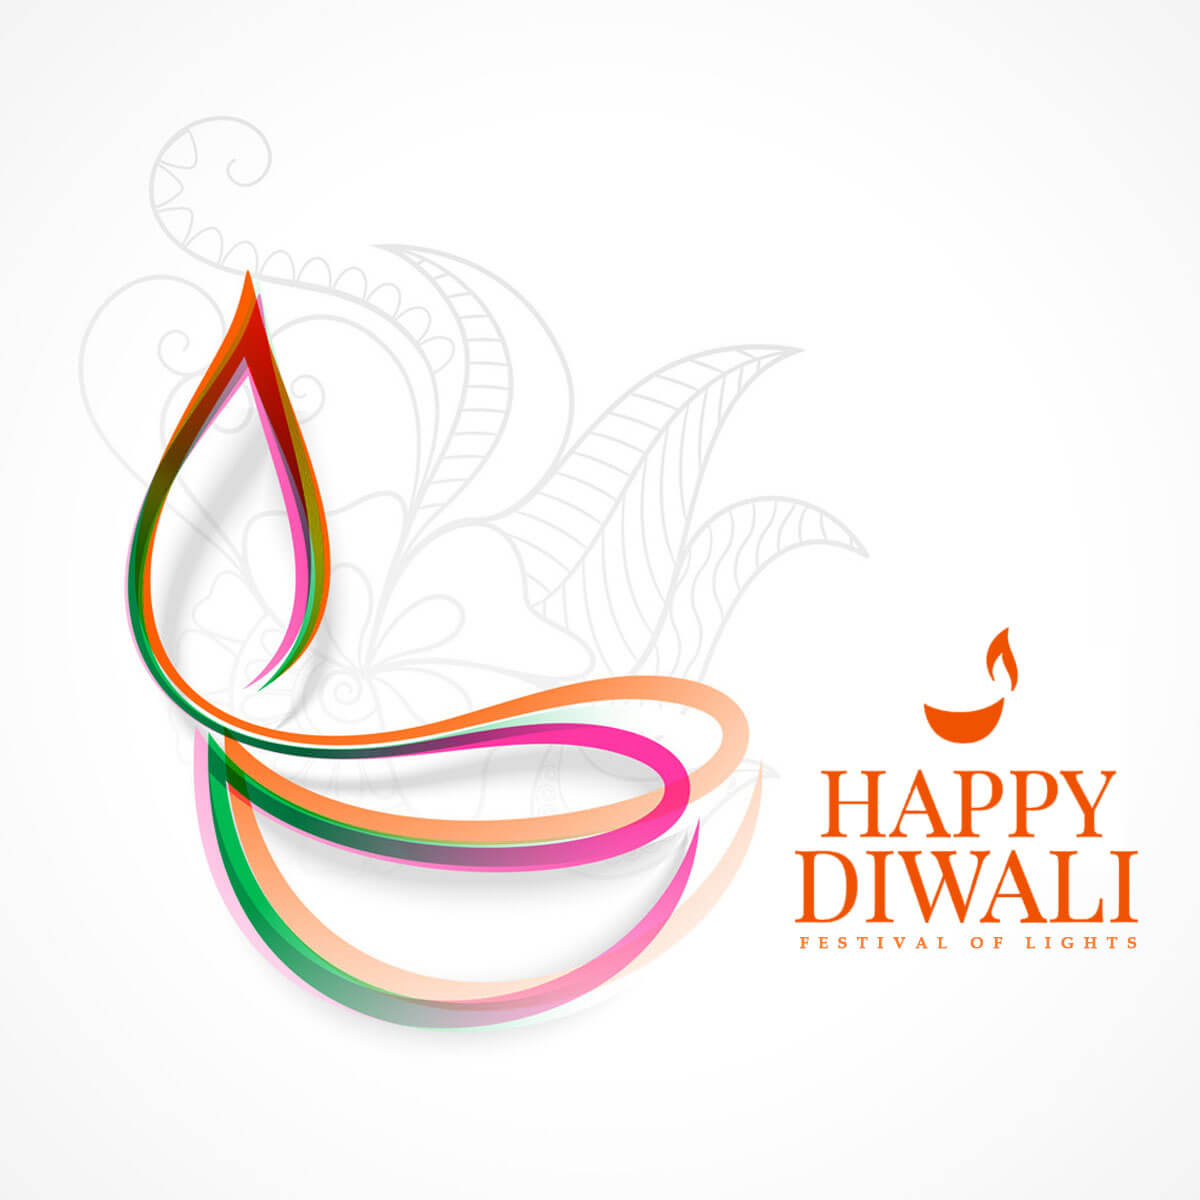 Happy diwali oil lamp abstract banner vector image - Pngfreepic